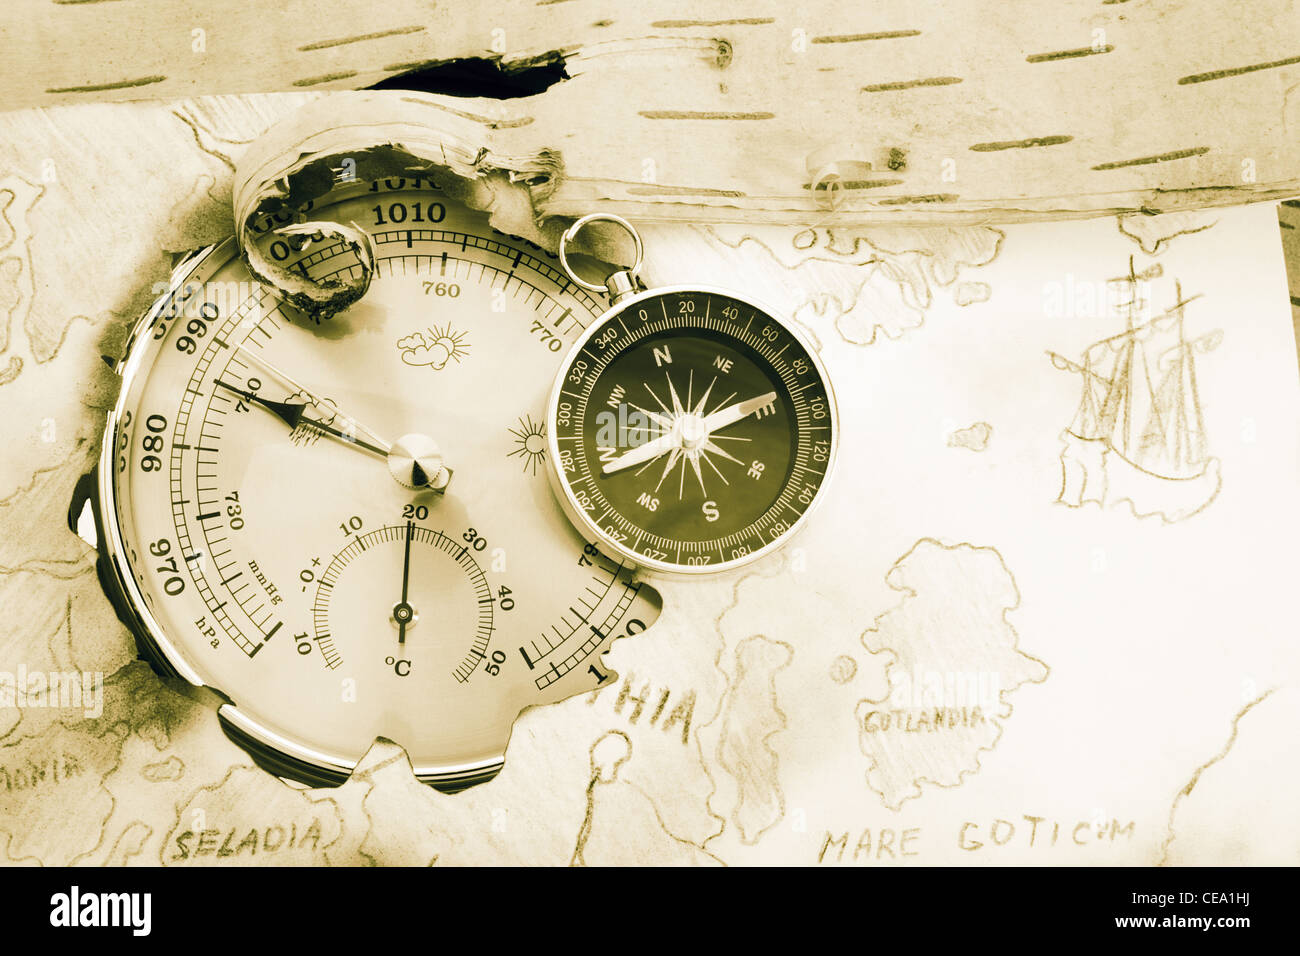 Compass, barometer and old navigating chart of North Europe Stock Photo